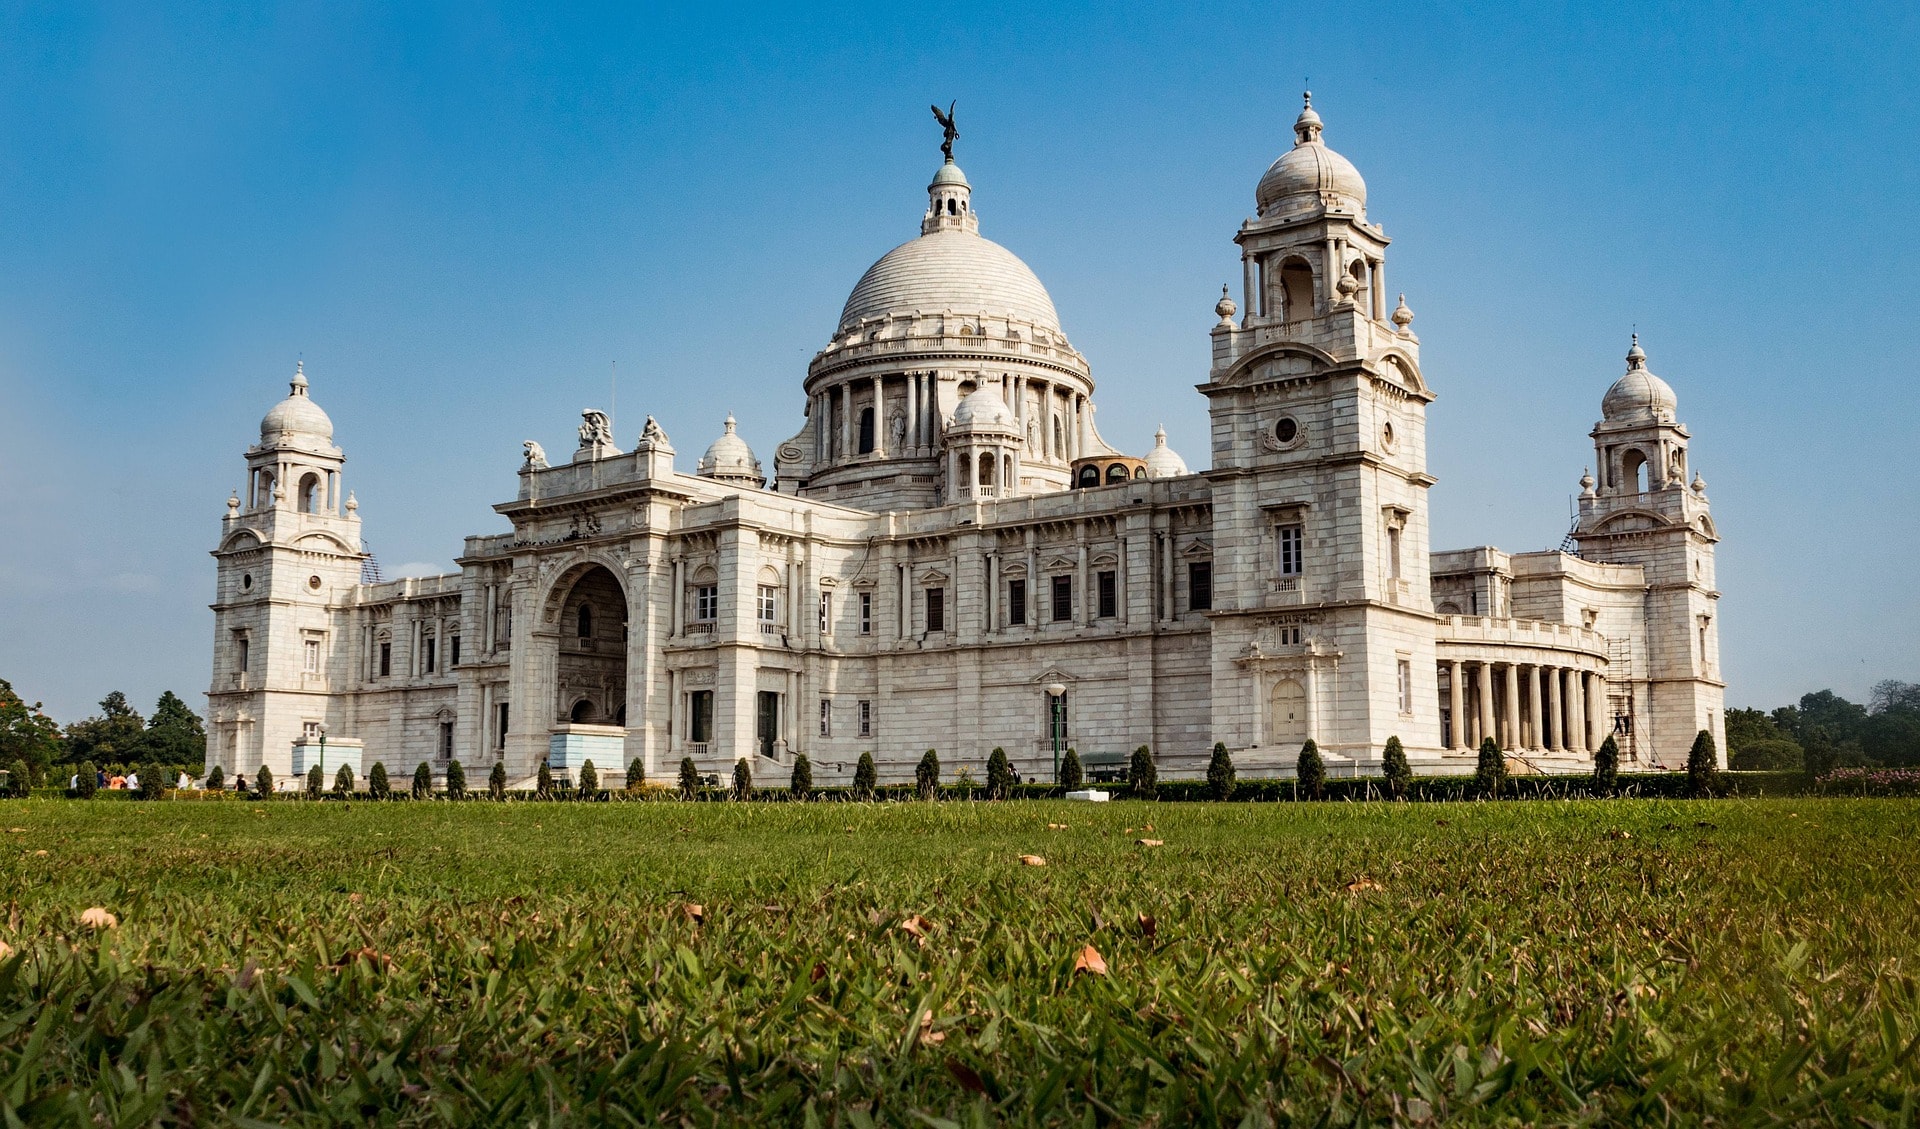 Which city of India would you be in if you are visiting the Victoria Memorial?